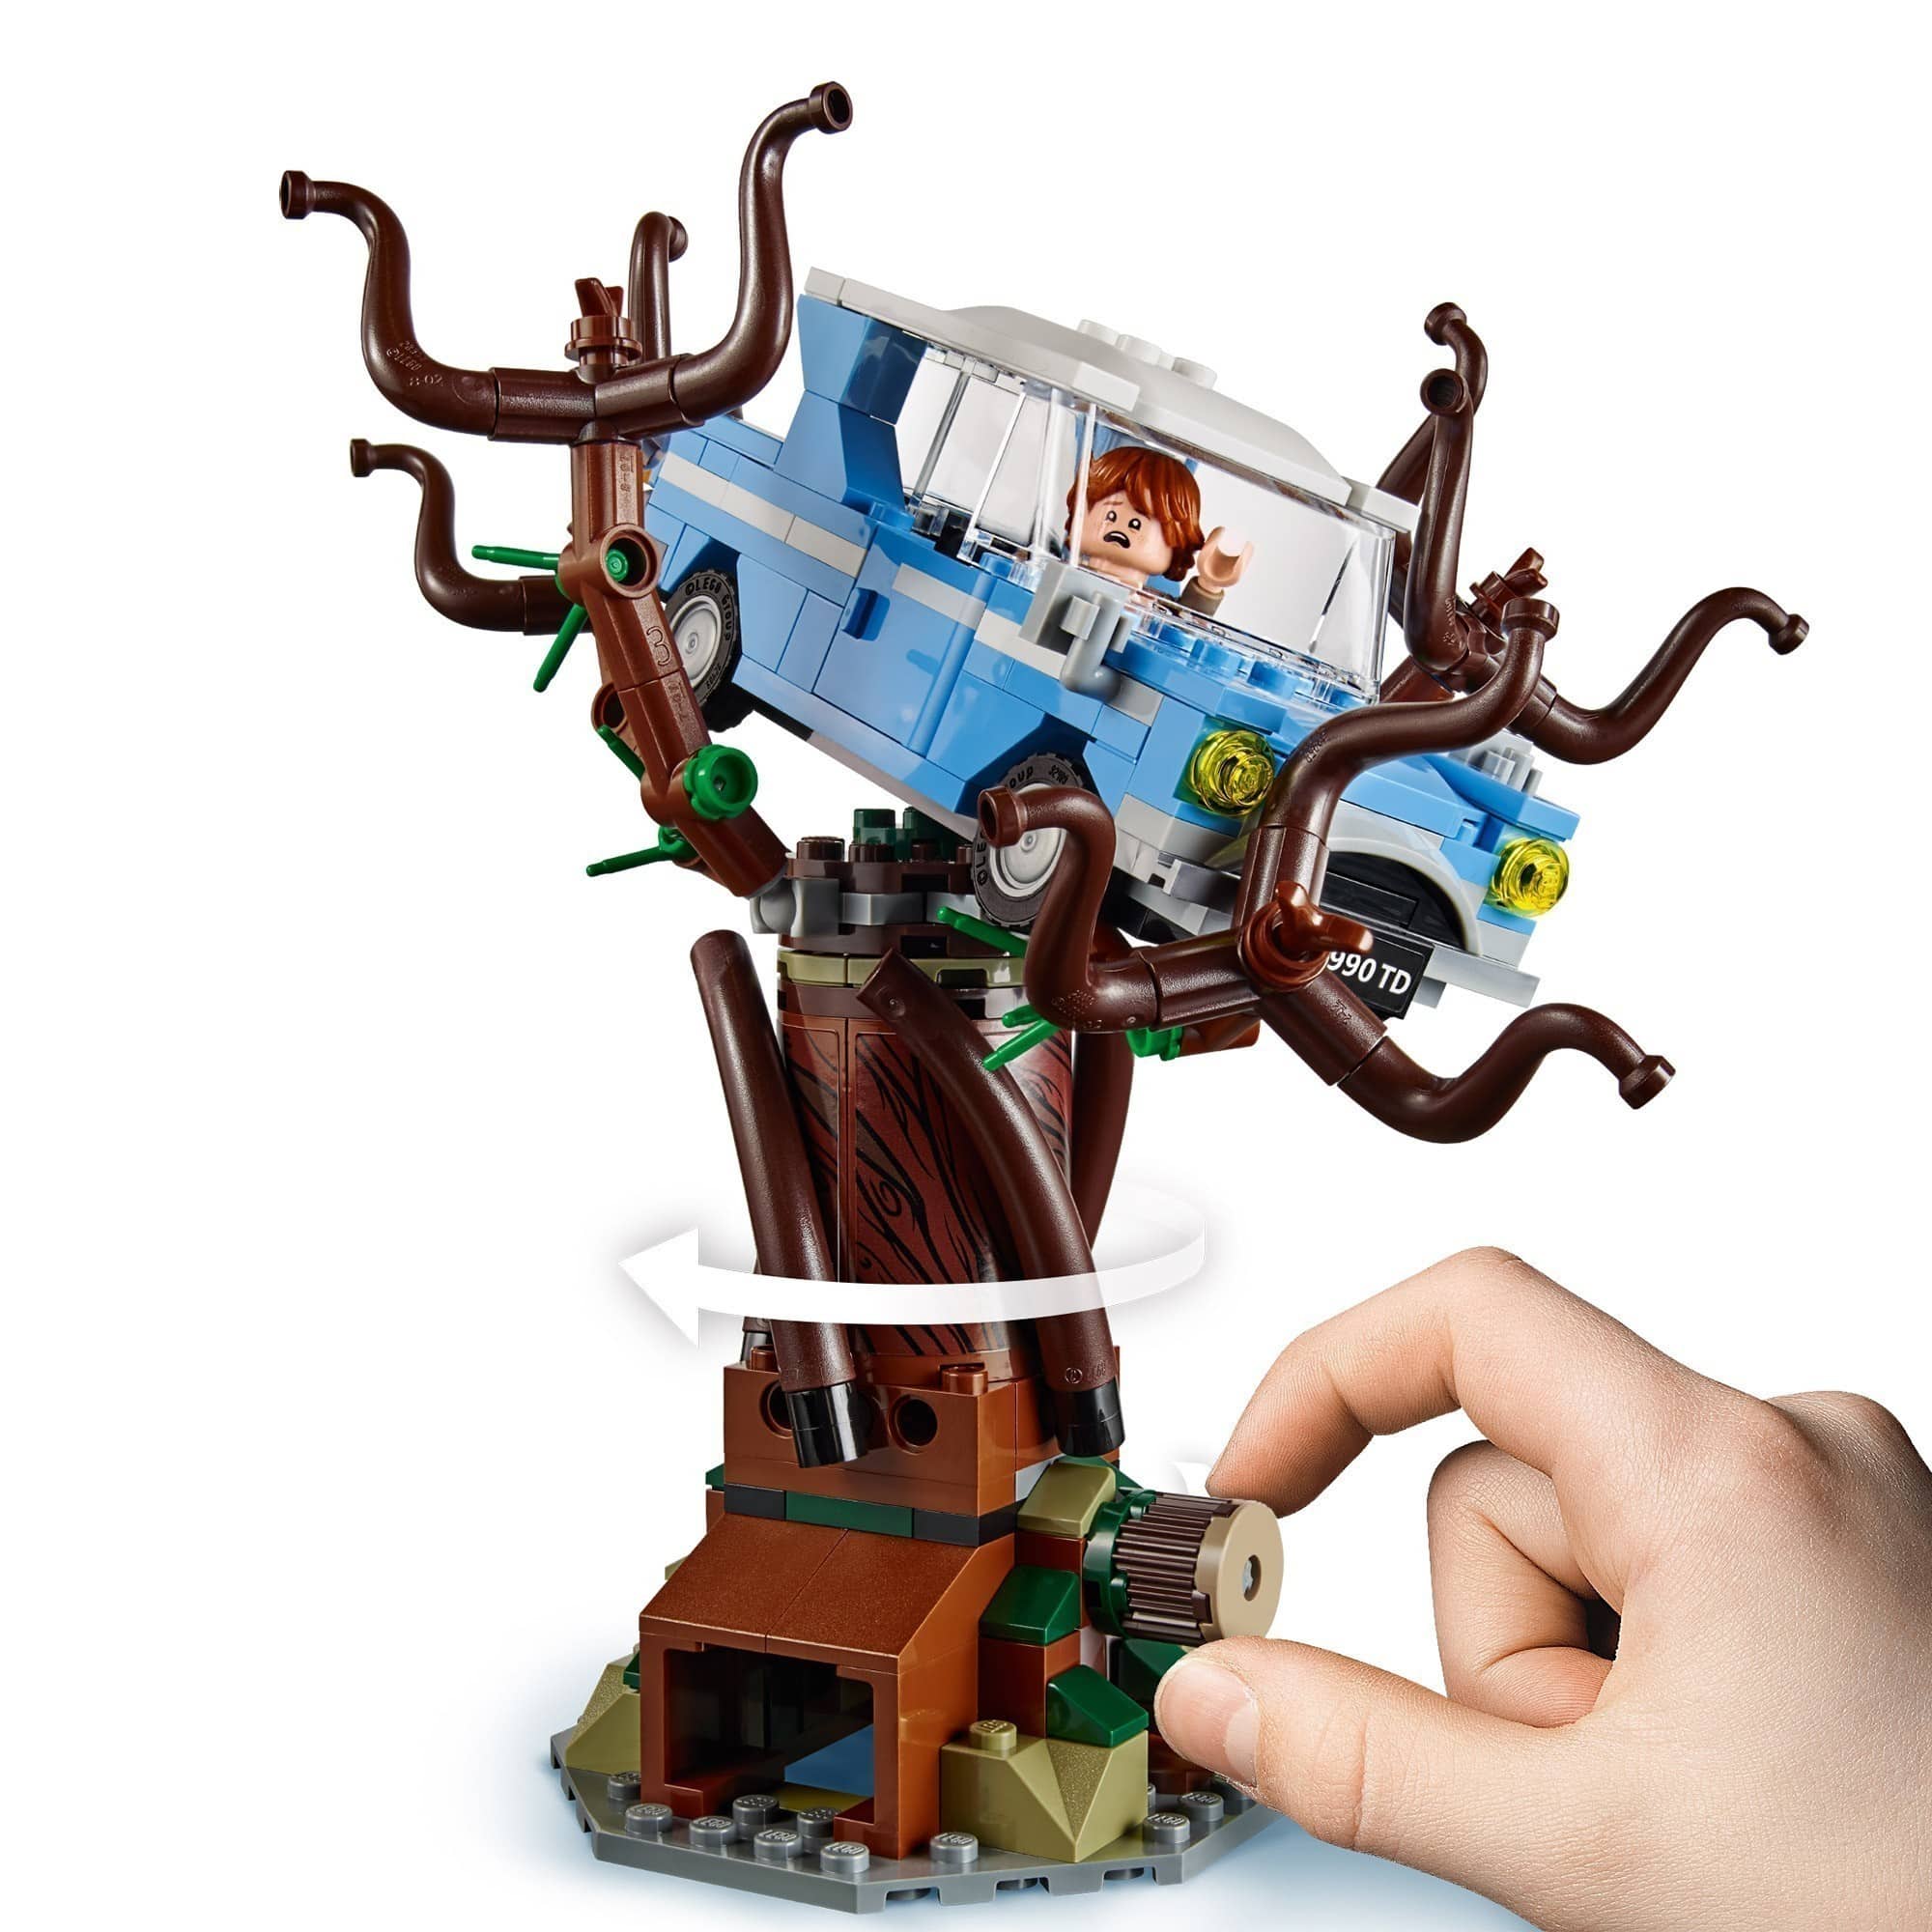 LEGO® - Harry Potter™ - 75953 Hogwarts Whomping Willow